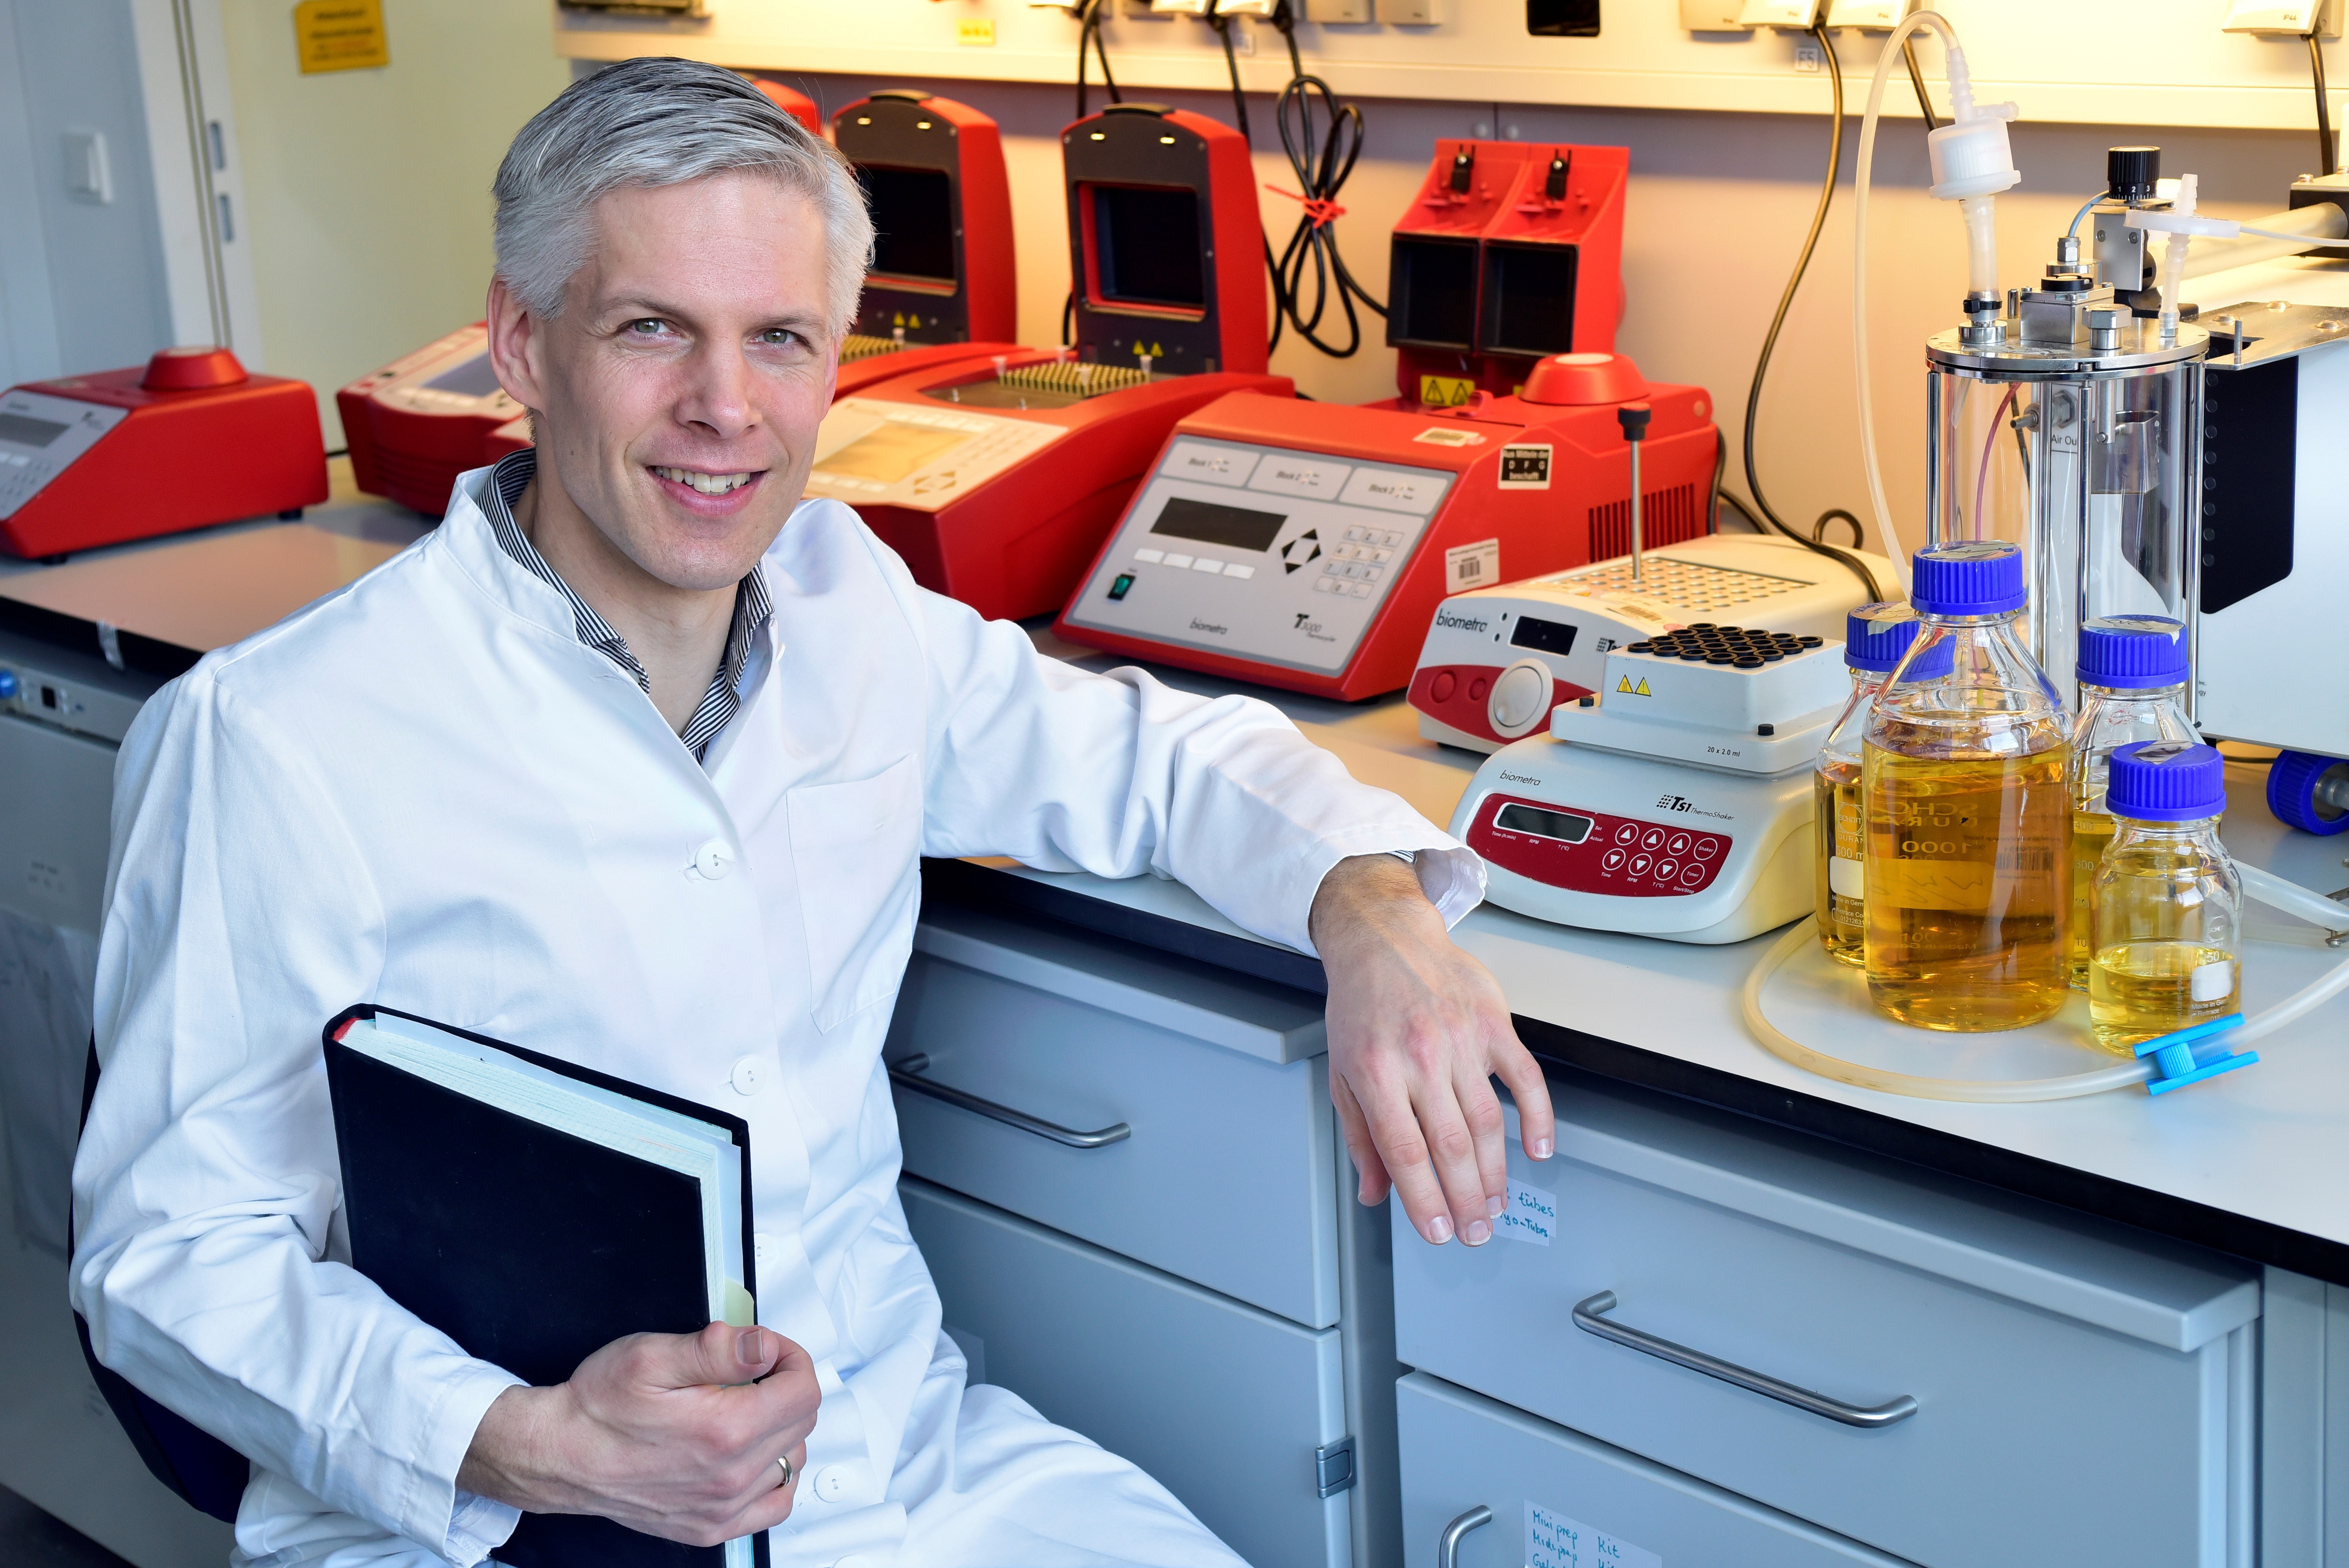 Wilfried Weber appointed Scientific Director of the Leibniz Institute for New Materials and professor at Saarland University